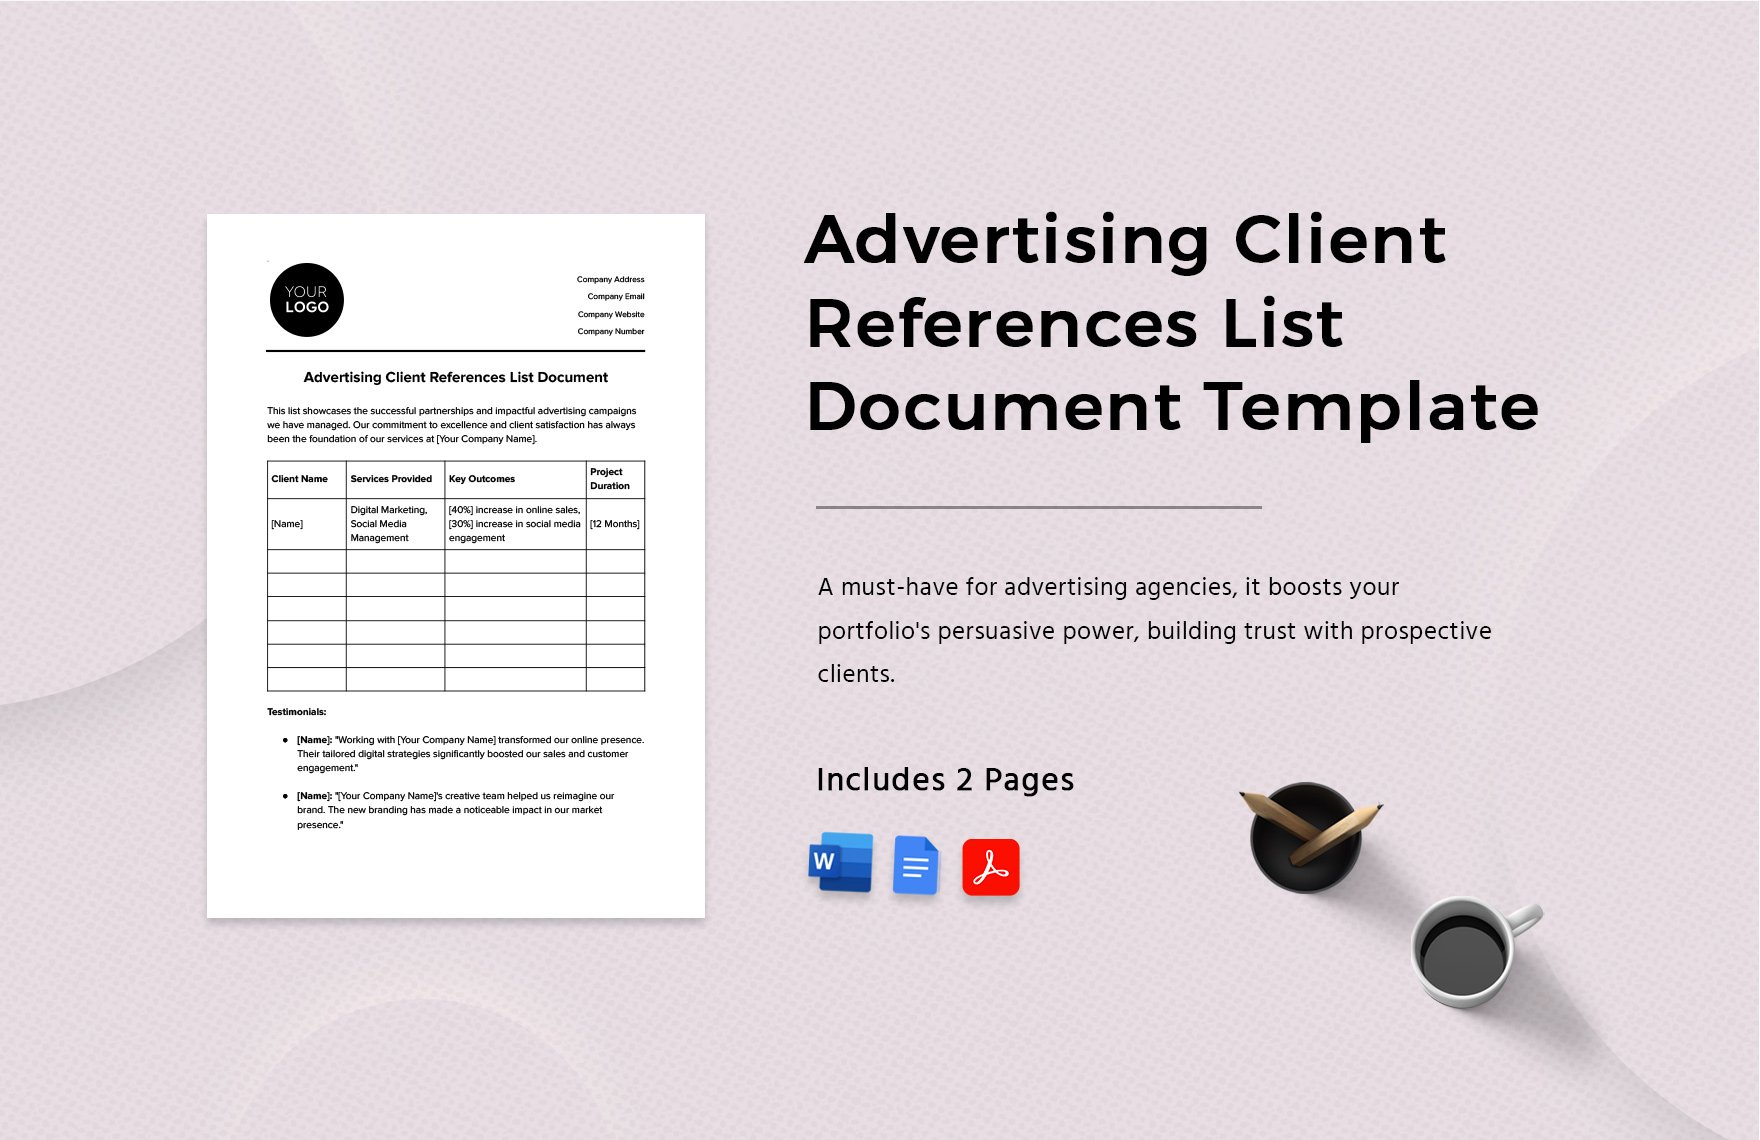 Advertising Client References List Document Template in Word, Google Docs, PDF